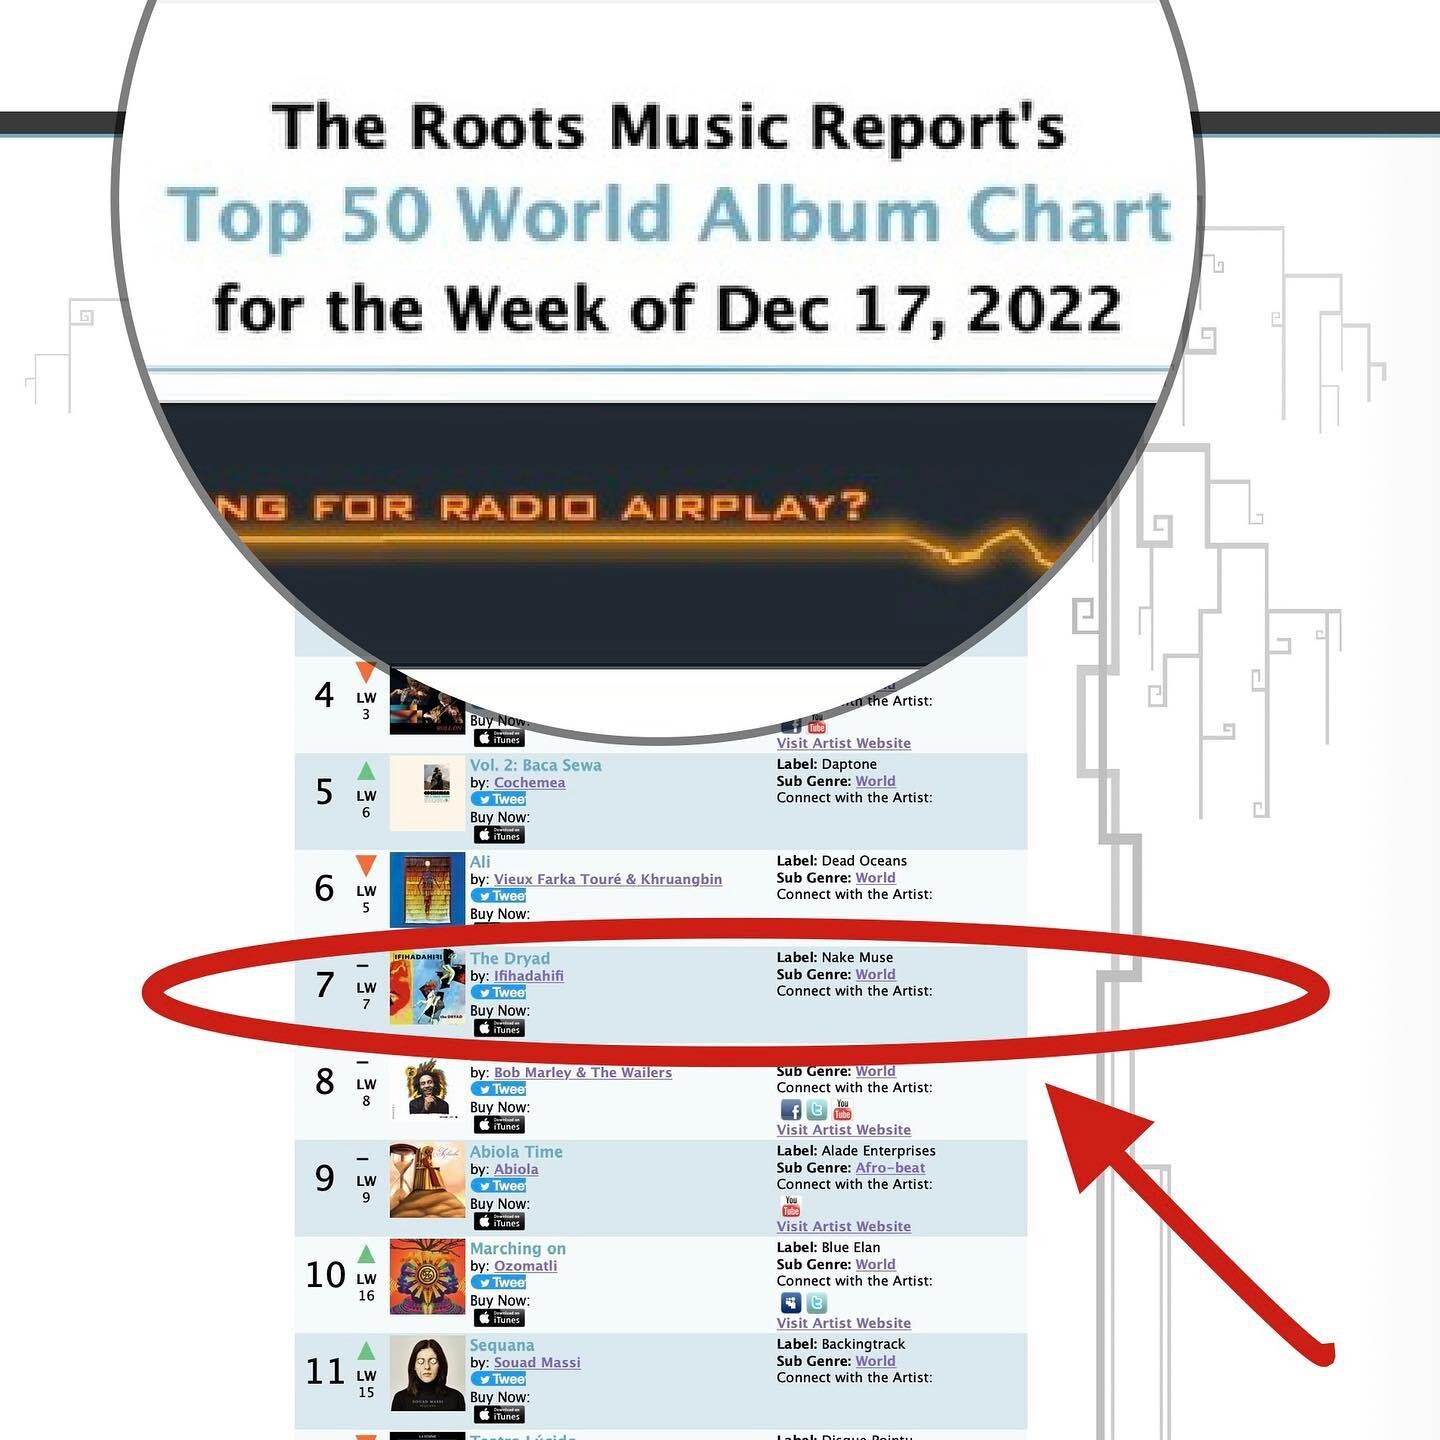 The Dryad has now made it to #7 on the Roots Music Report&rsquo;s Top 50 Albums Chart this week! 🙌🏻👏🏾😀